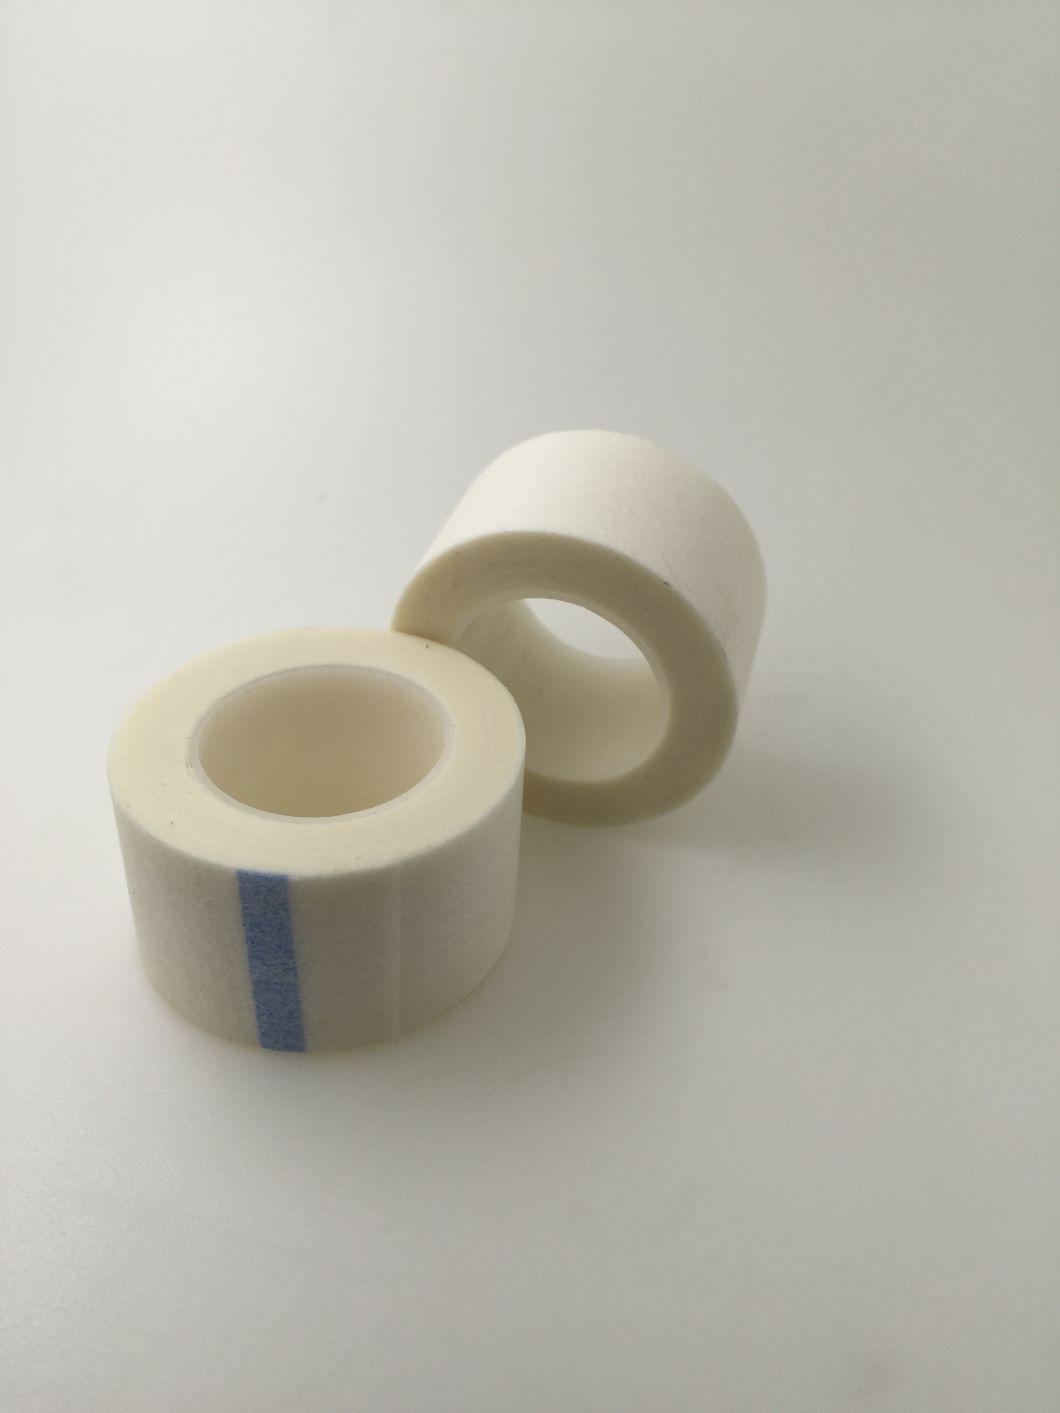 Microporous Medical Tape Adhesive Bandage, Hypoallergenic Self Adhesive Rolls, Paper Tape, Non-Woven Tape